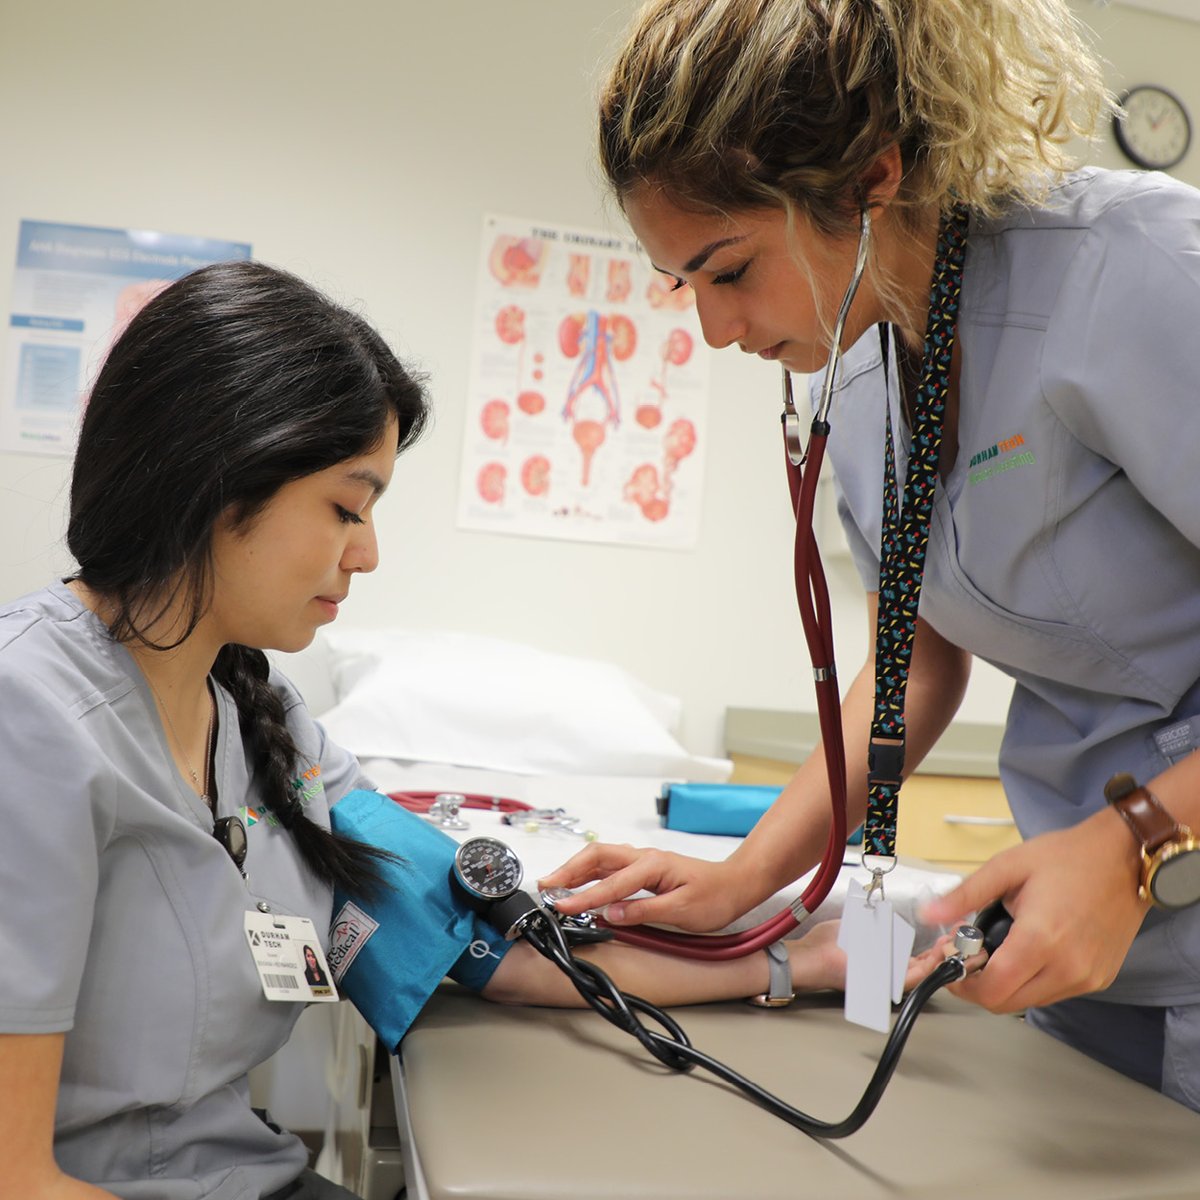 It's Medical Assistants Recognition Week! Learn more about the Medical Assisting program at Durham Tech: bit.ly/31B52sP (File Photo 2019) #MARweek #DurhamTech #DoGreatThings #MedicalAssistants